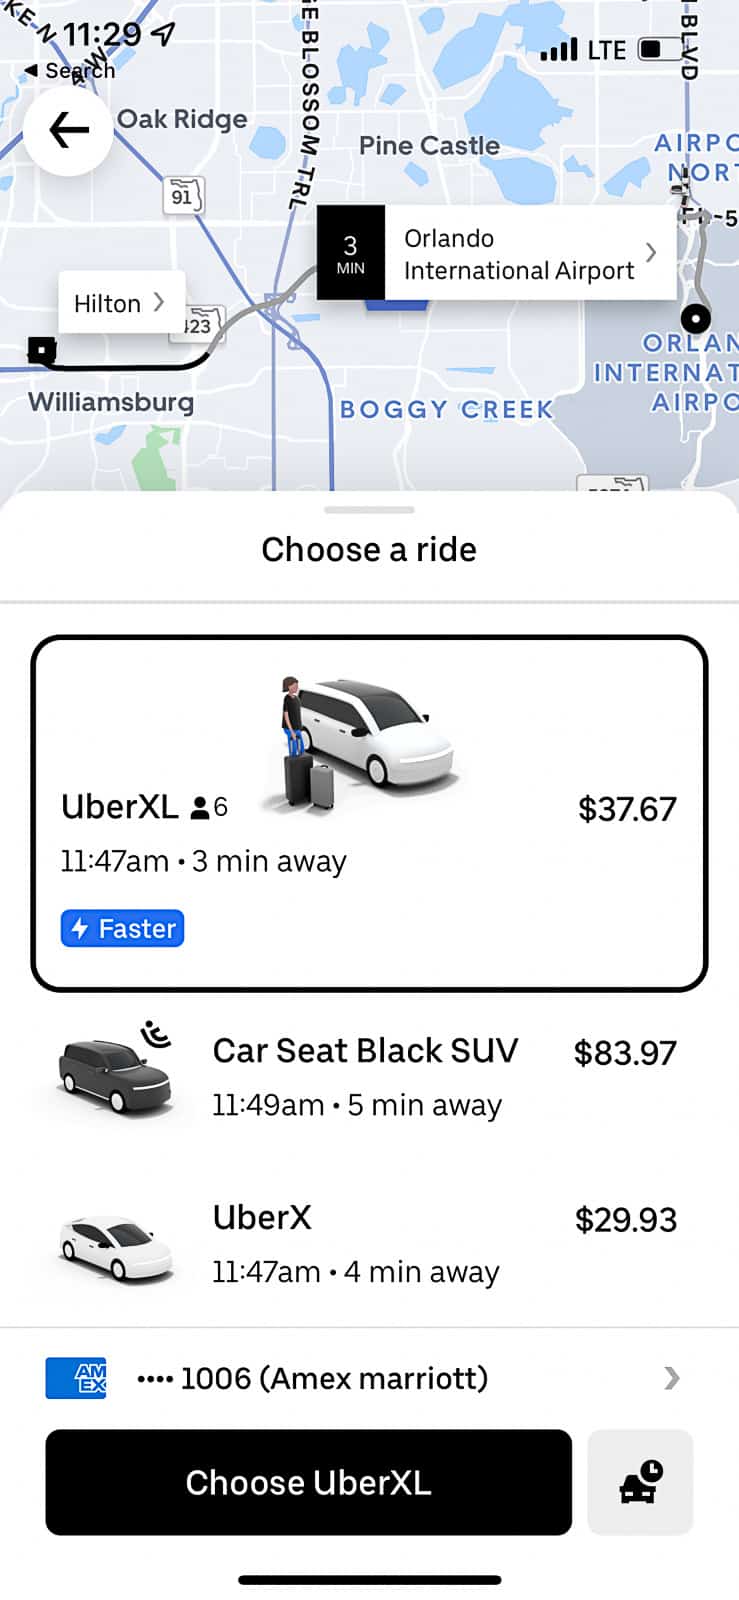 MCO Airport Uber Ride Prices for Uber XL and Uber Black and Uber with a car seat